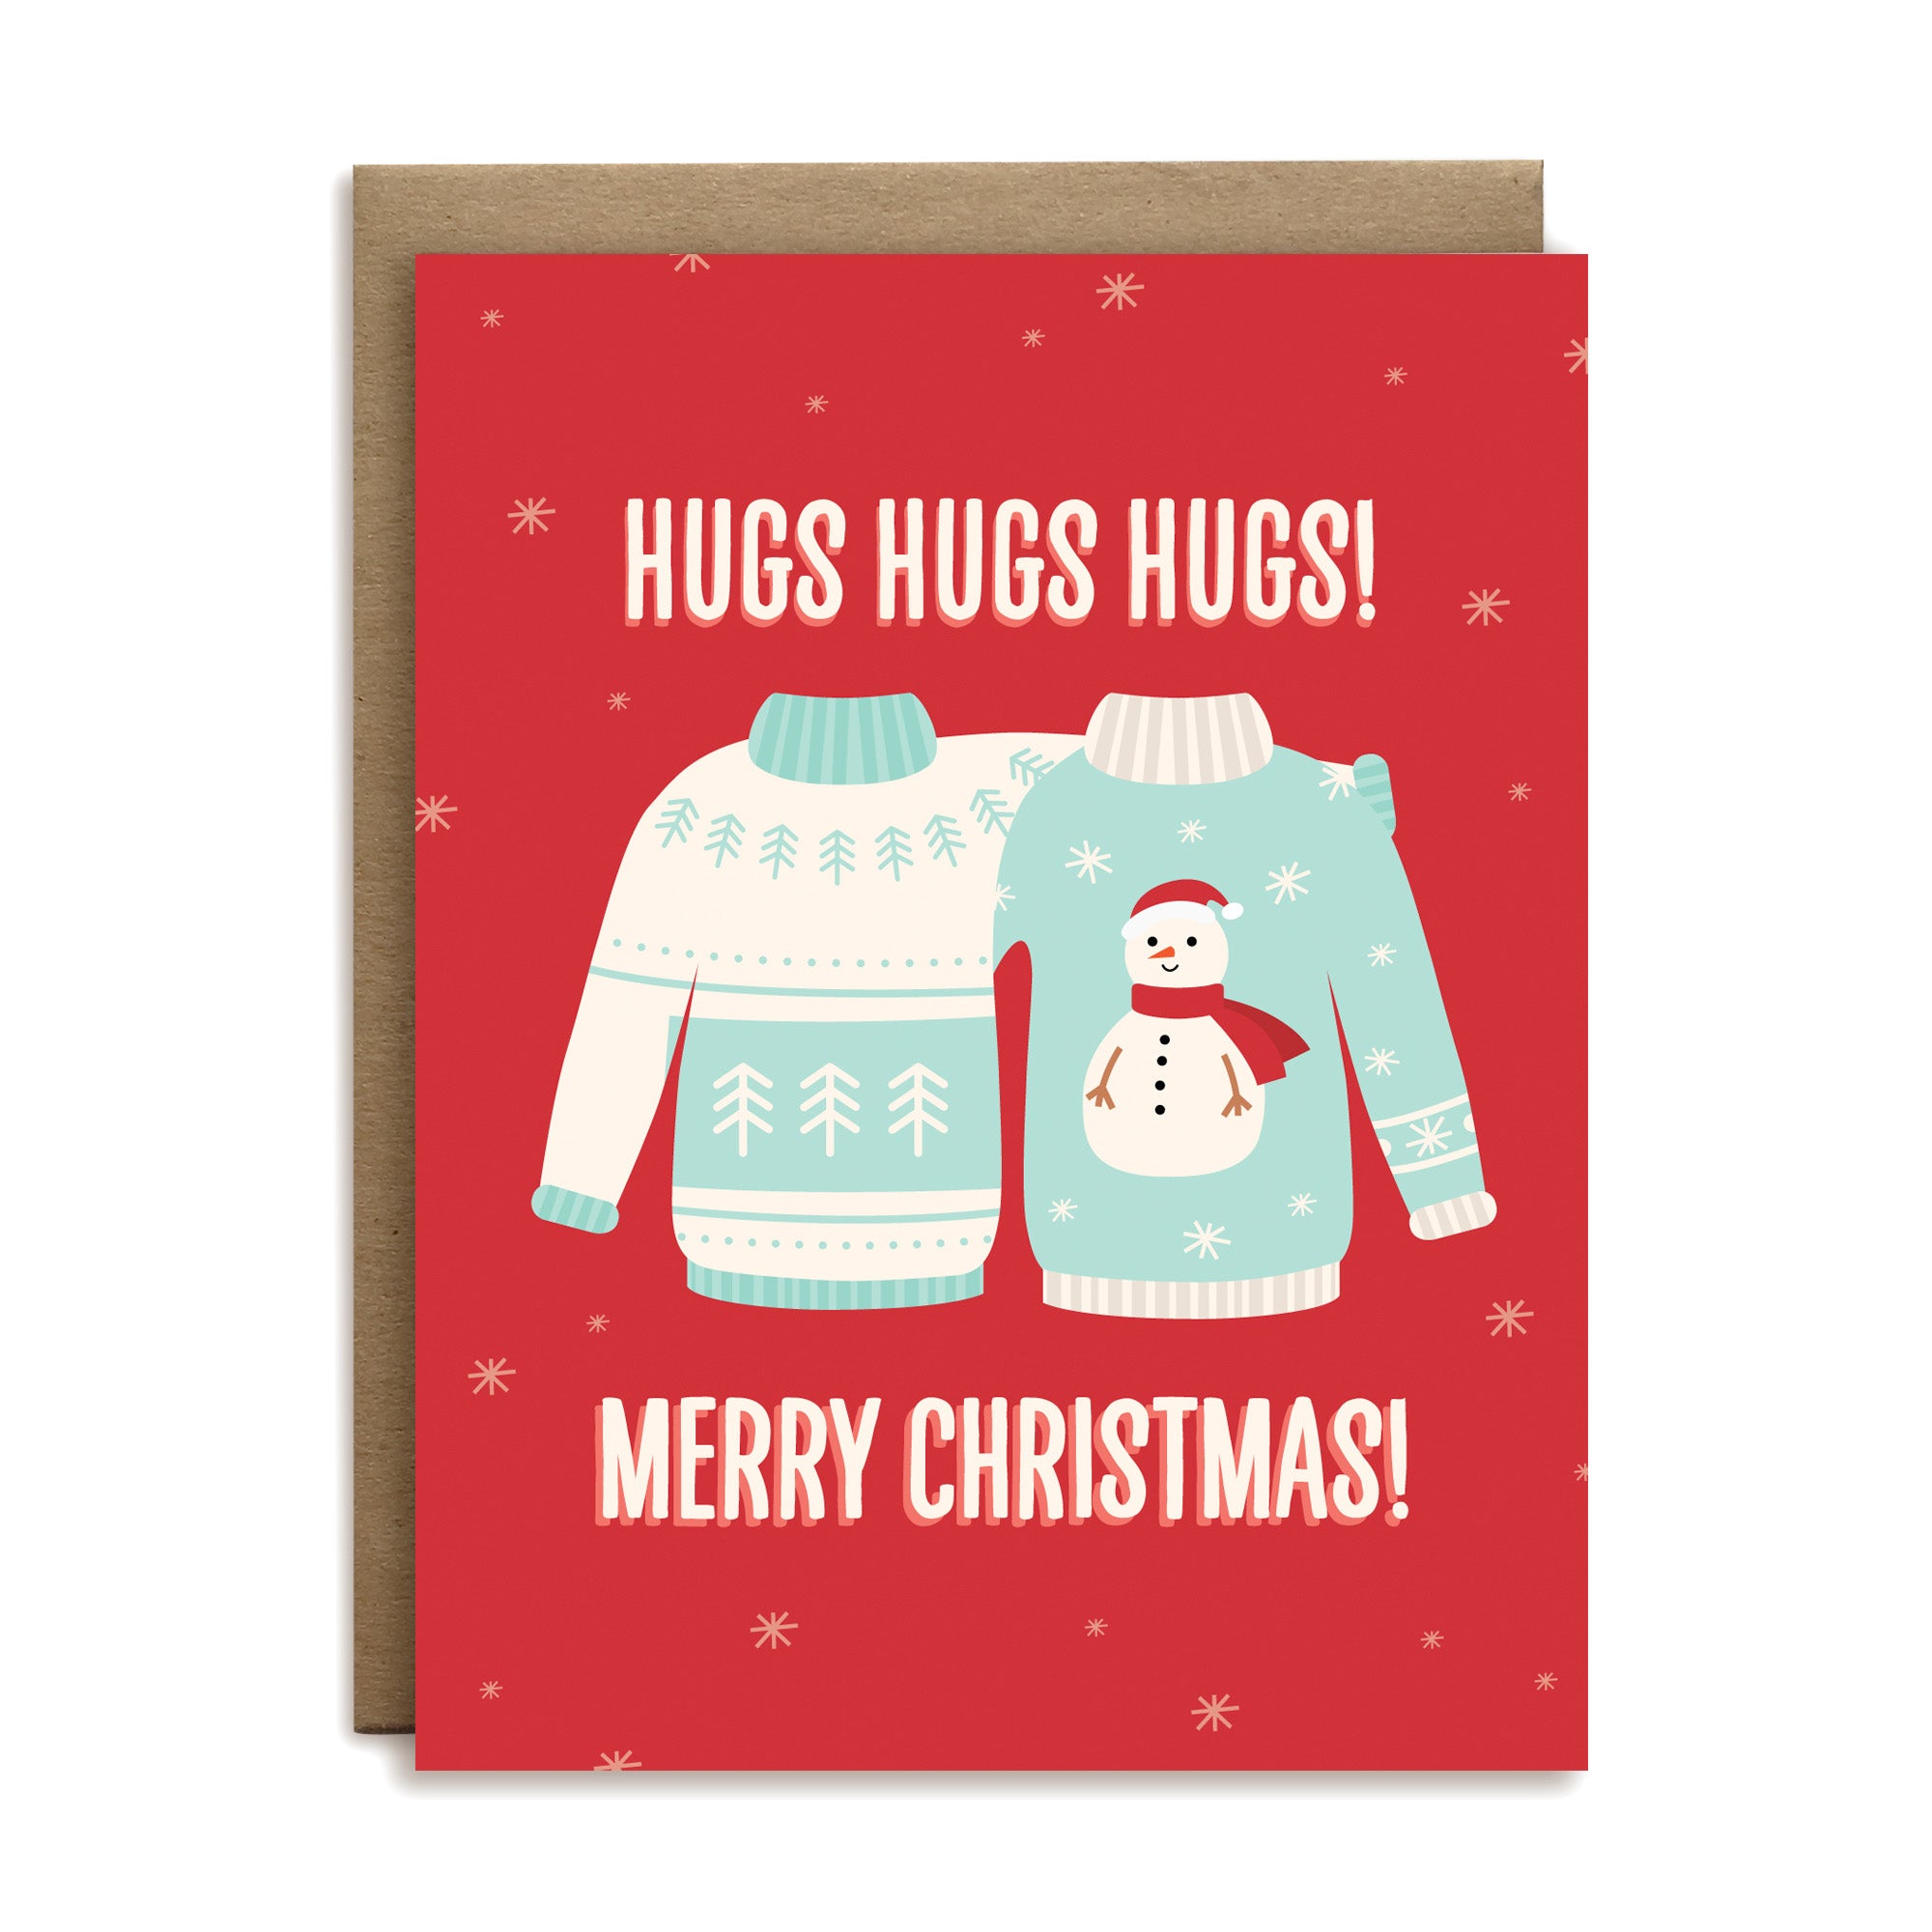 Hugs hugs hugs! Merry Christmas sweaters holiday greeting card by I’ll Know It When I See It